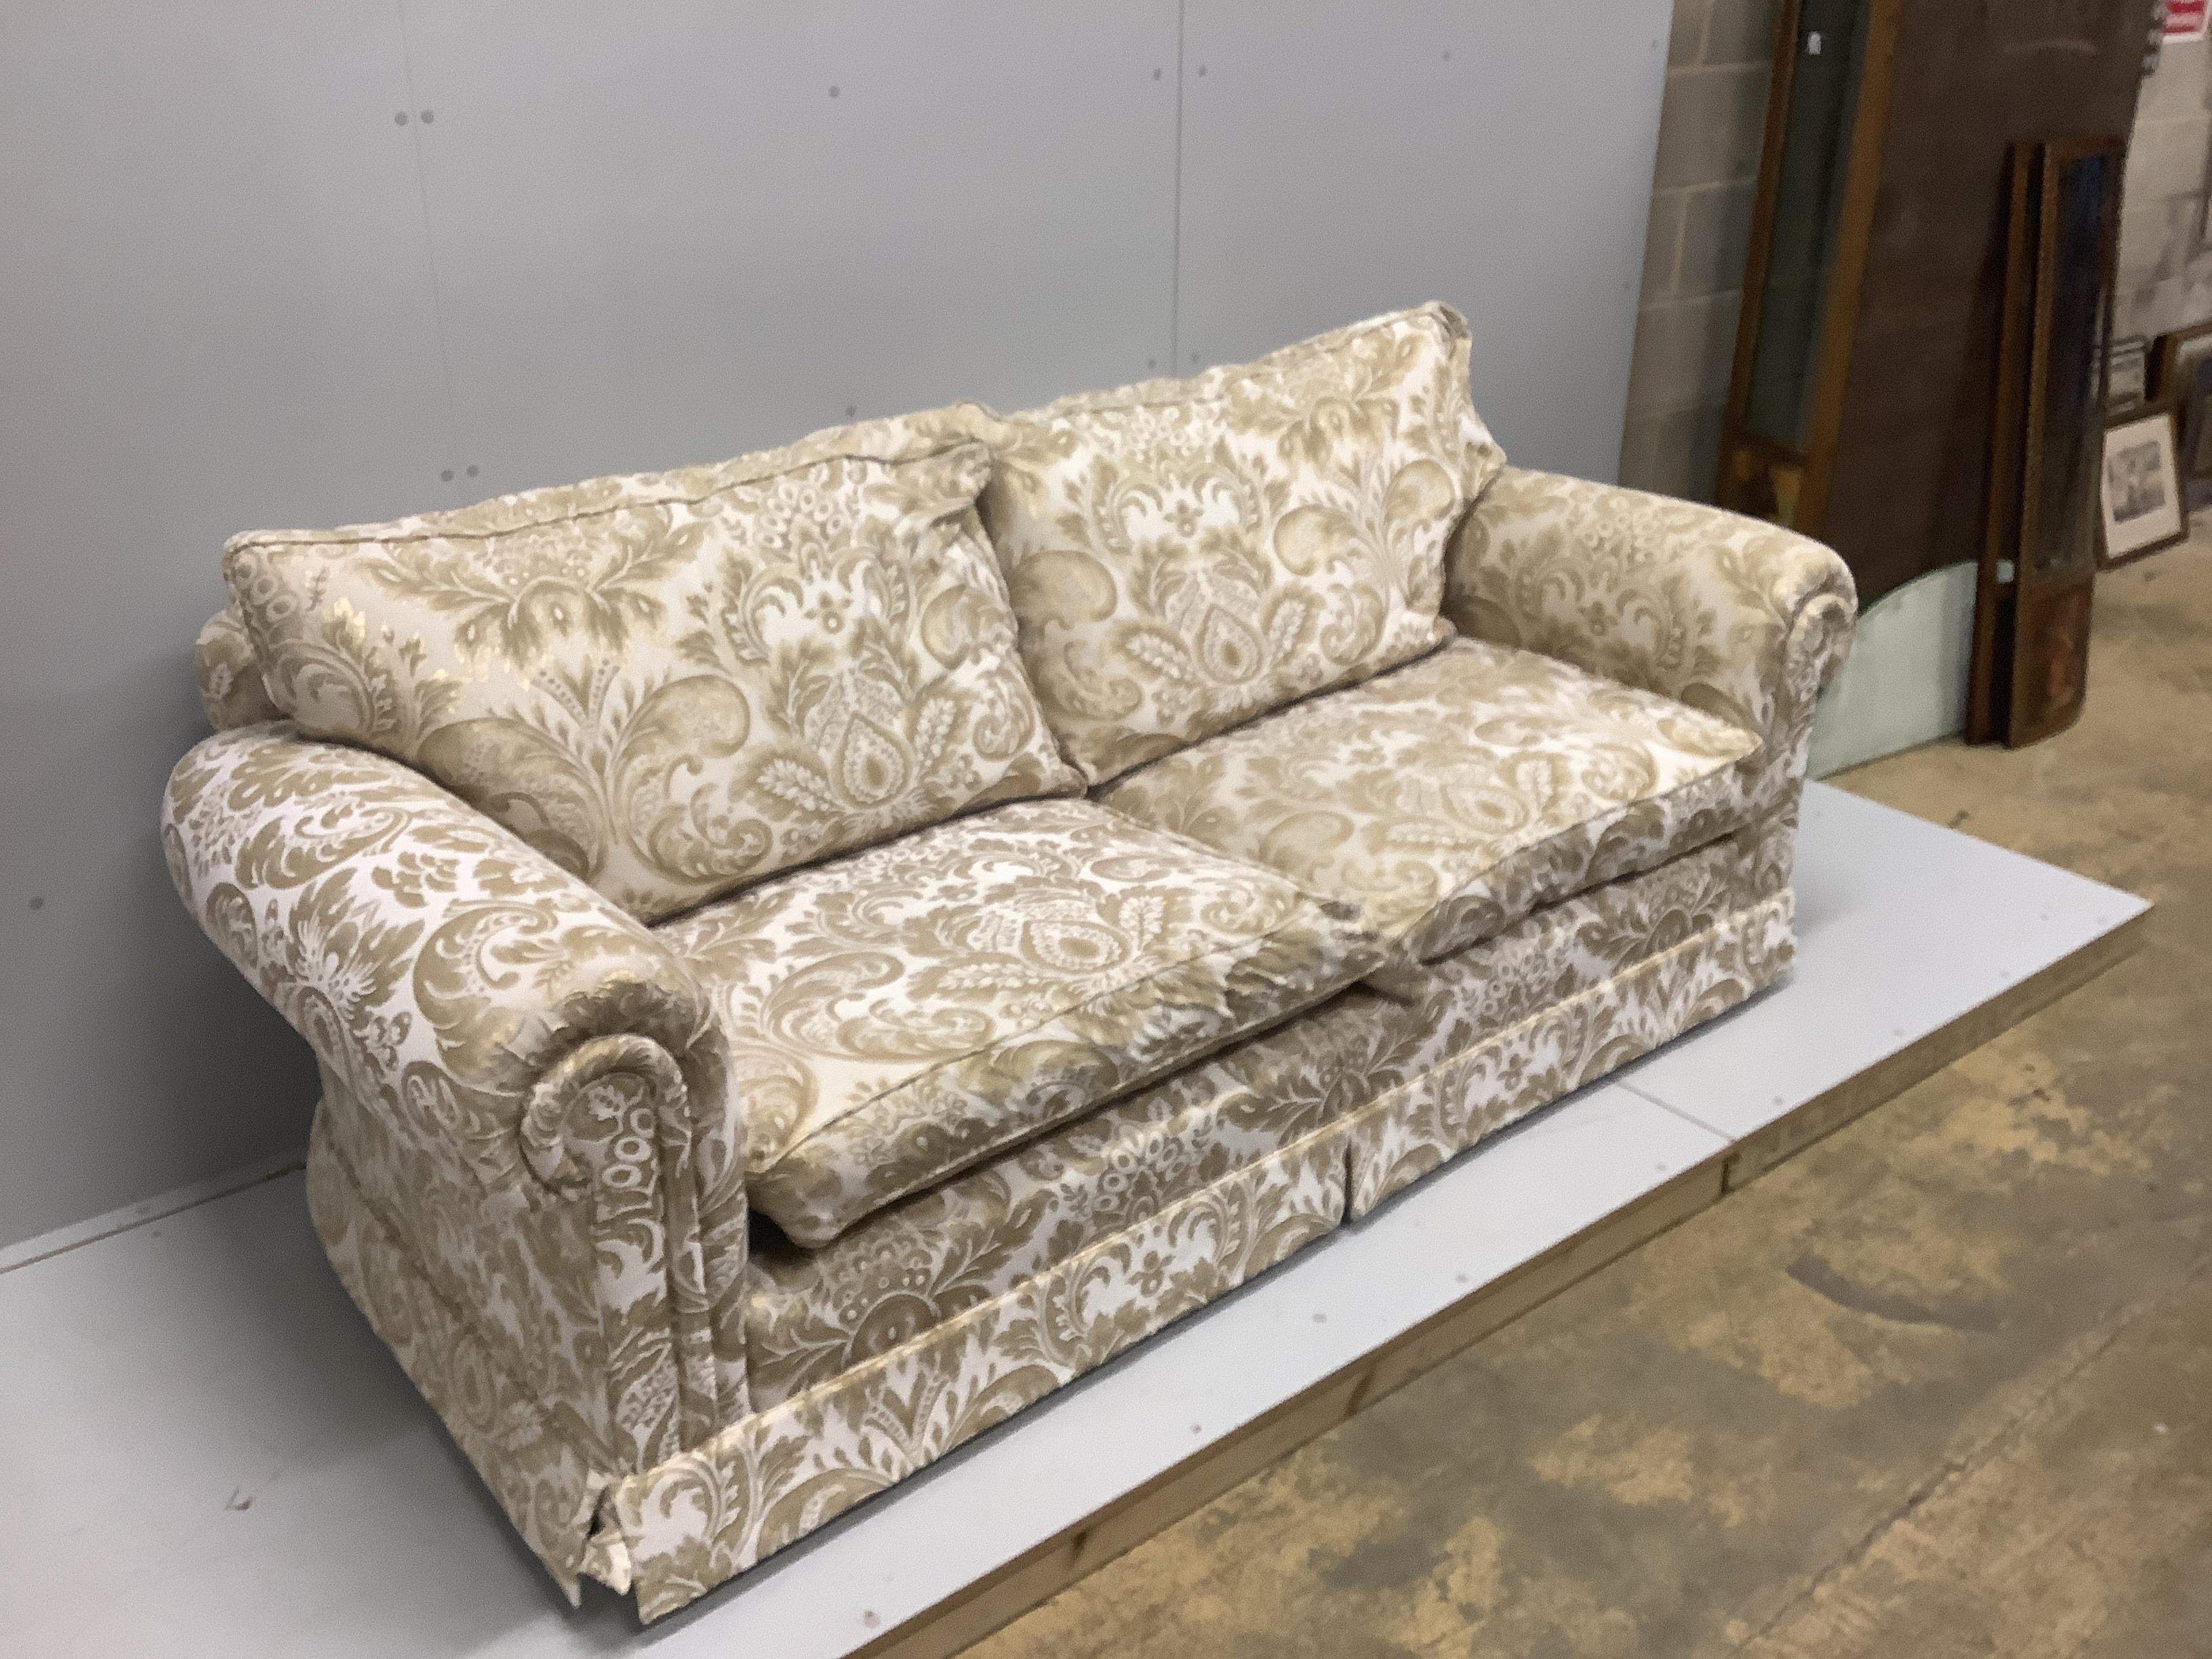 Two Duresta two seat sofas and a matching rectangular footstool, larger sofa width 220cm, depth 96cm, height 96cm                                                                                                           